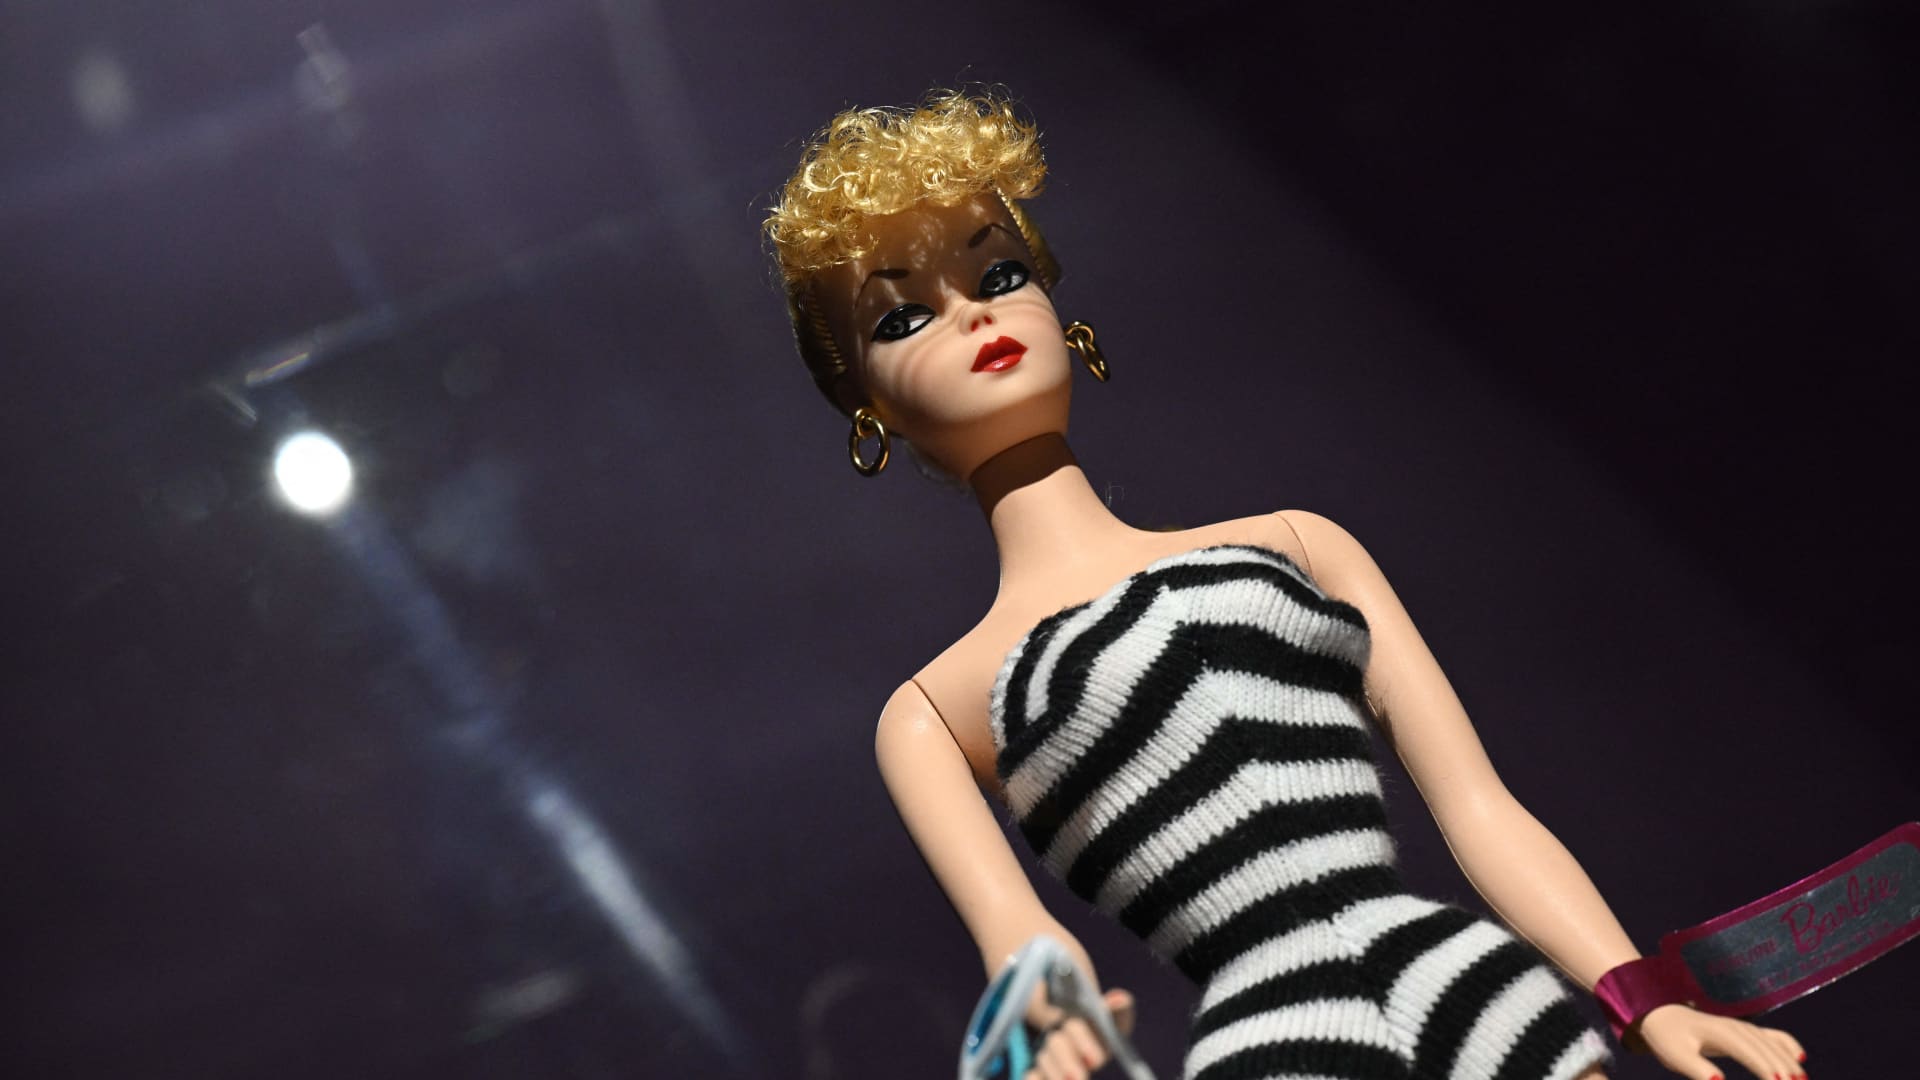 Barbie’s designer made missiles for Raytheon first as ‘Barbenheimer’ rocks field workplaces